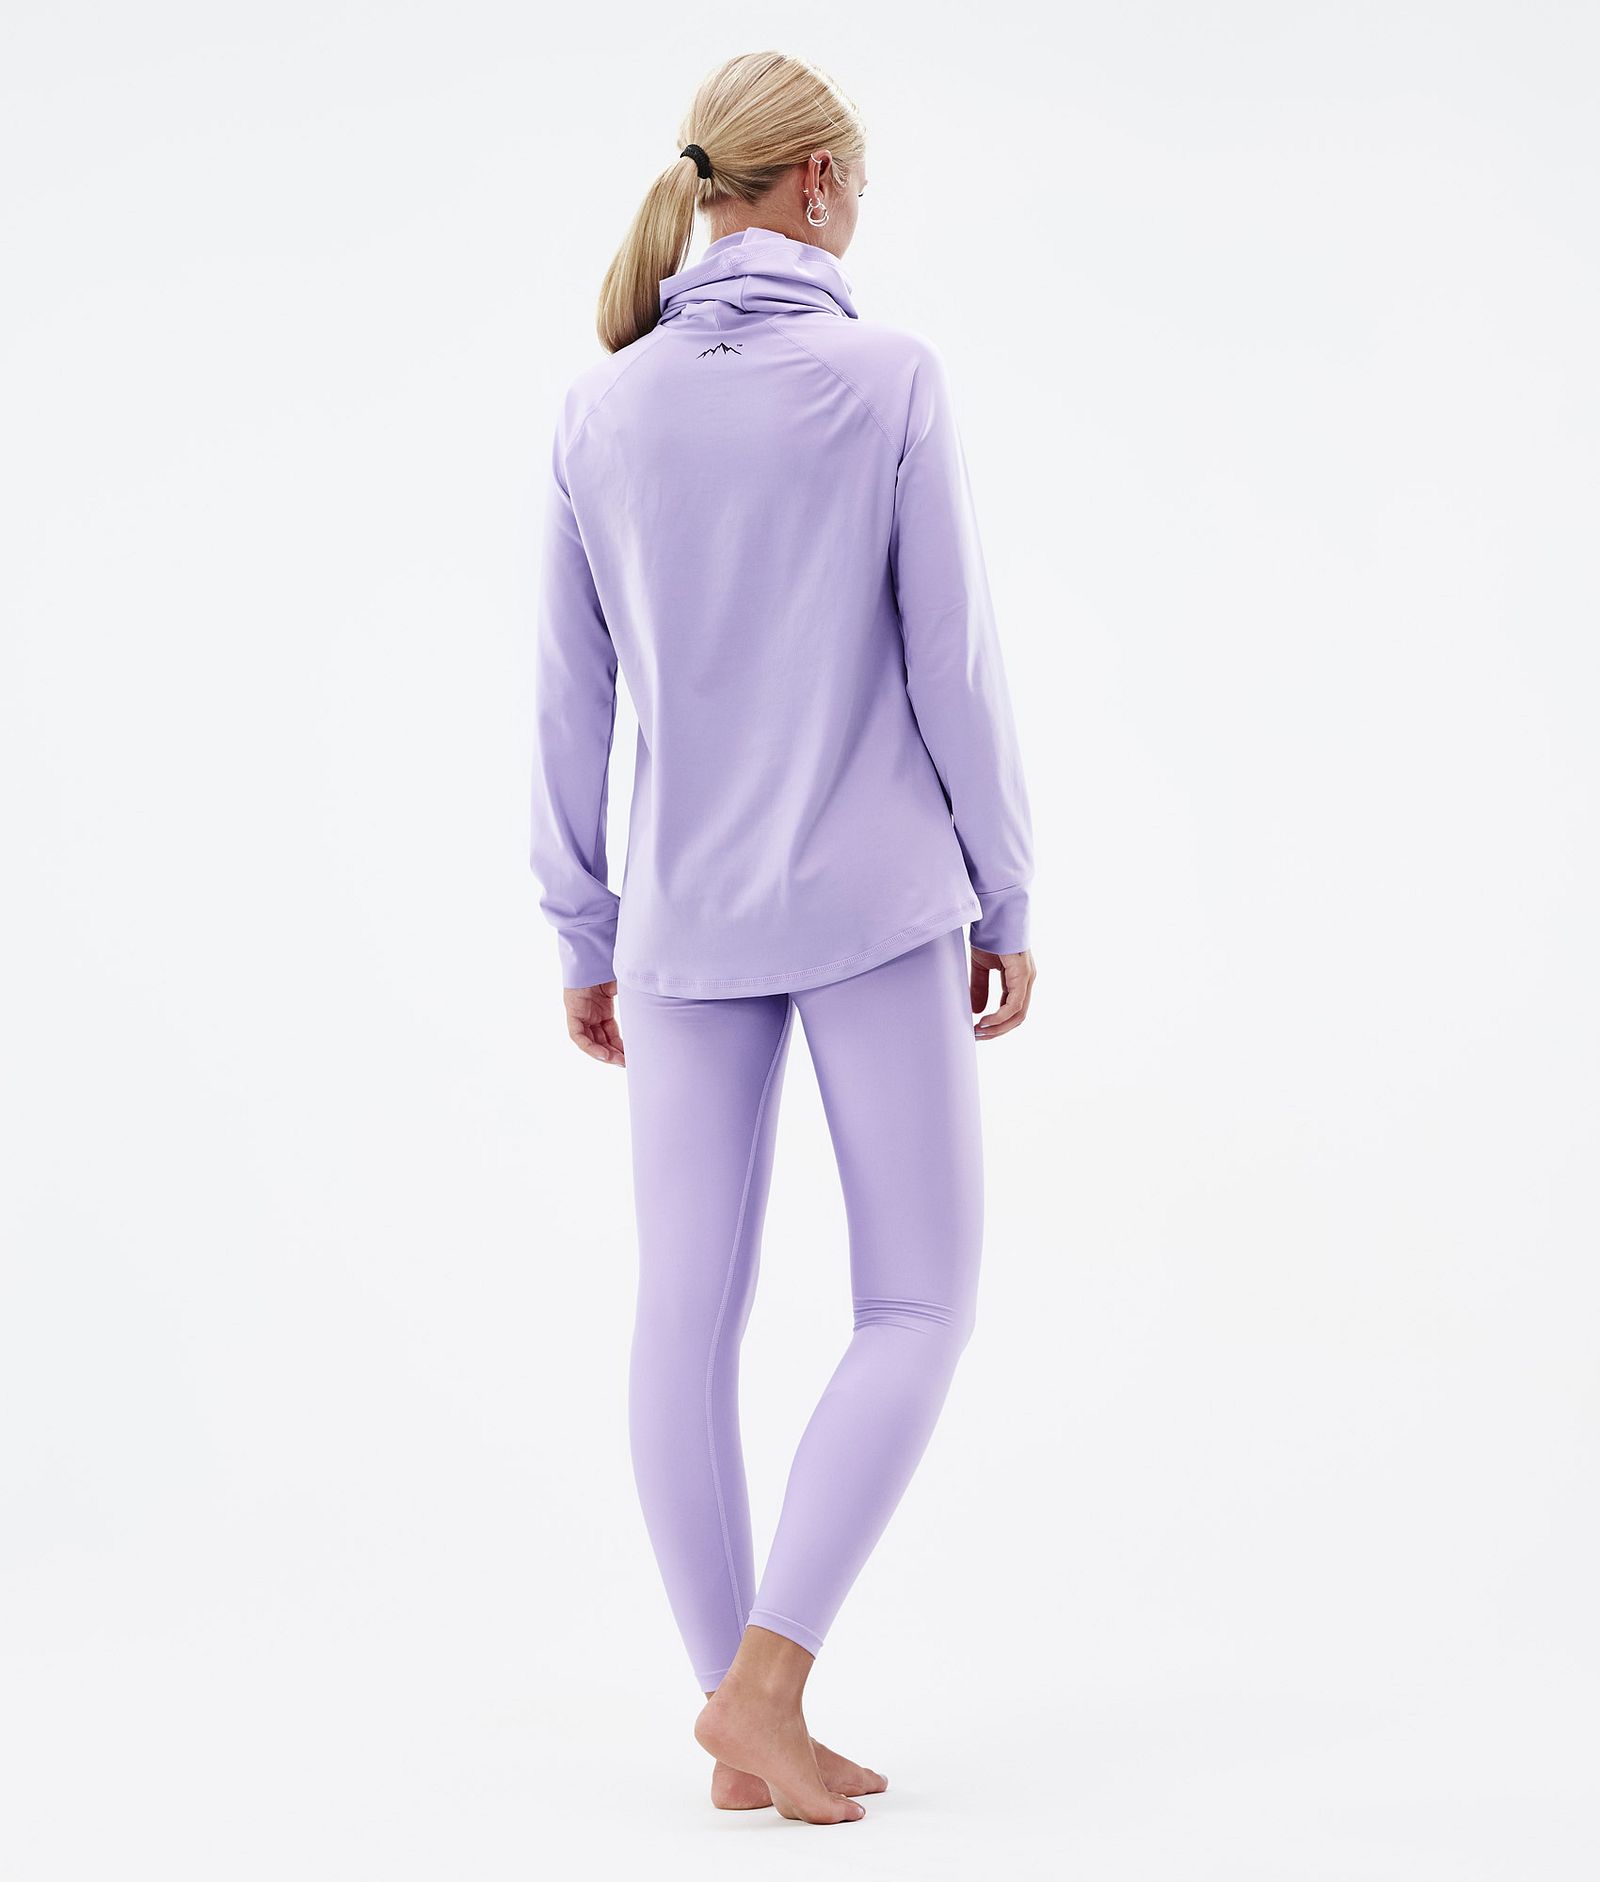 Snuggle W 2022 Base Layer Top Women 2X-Up Faded Violet, Image 5 of 6